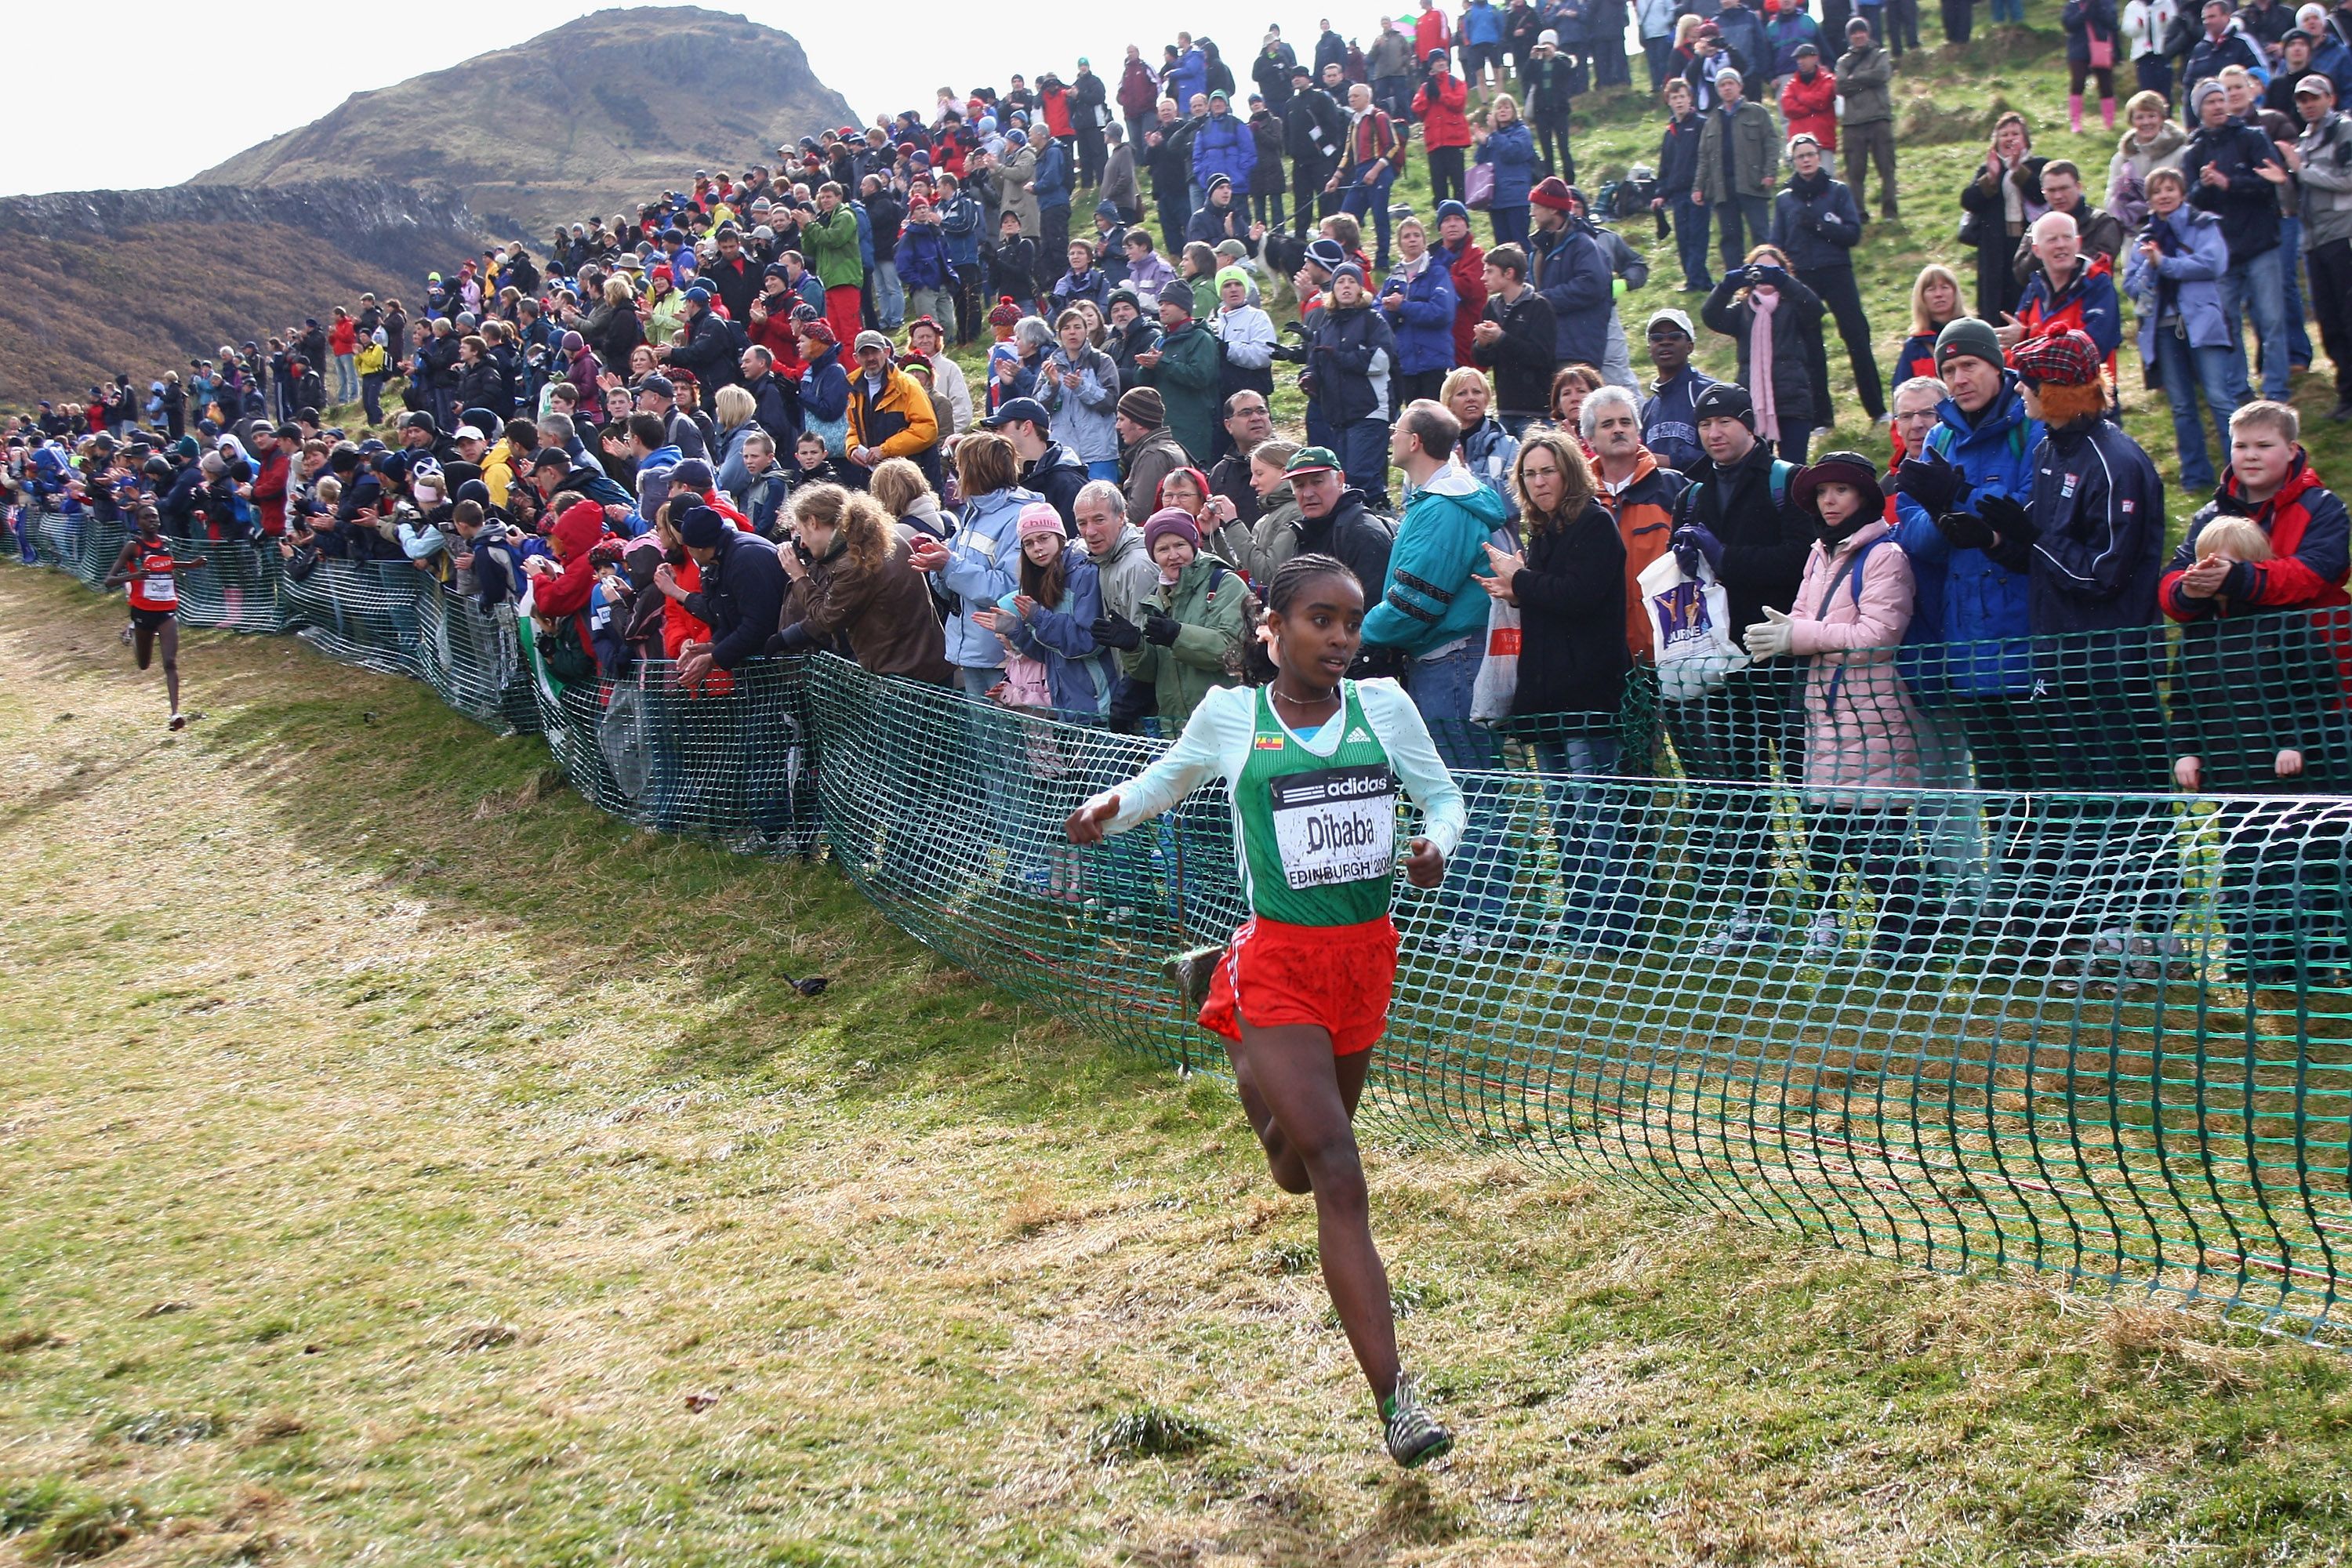 Genzebe Dibaba on her way to an U20 women's win at the 2008 World Cross Country Championships